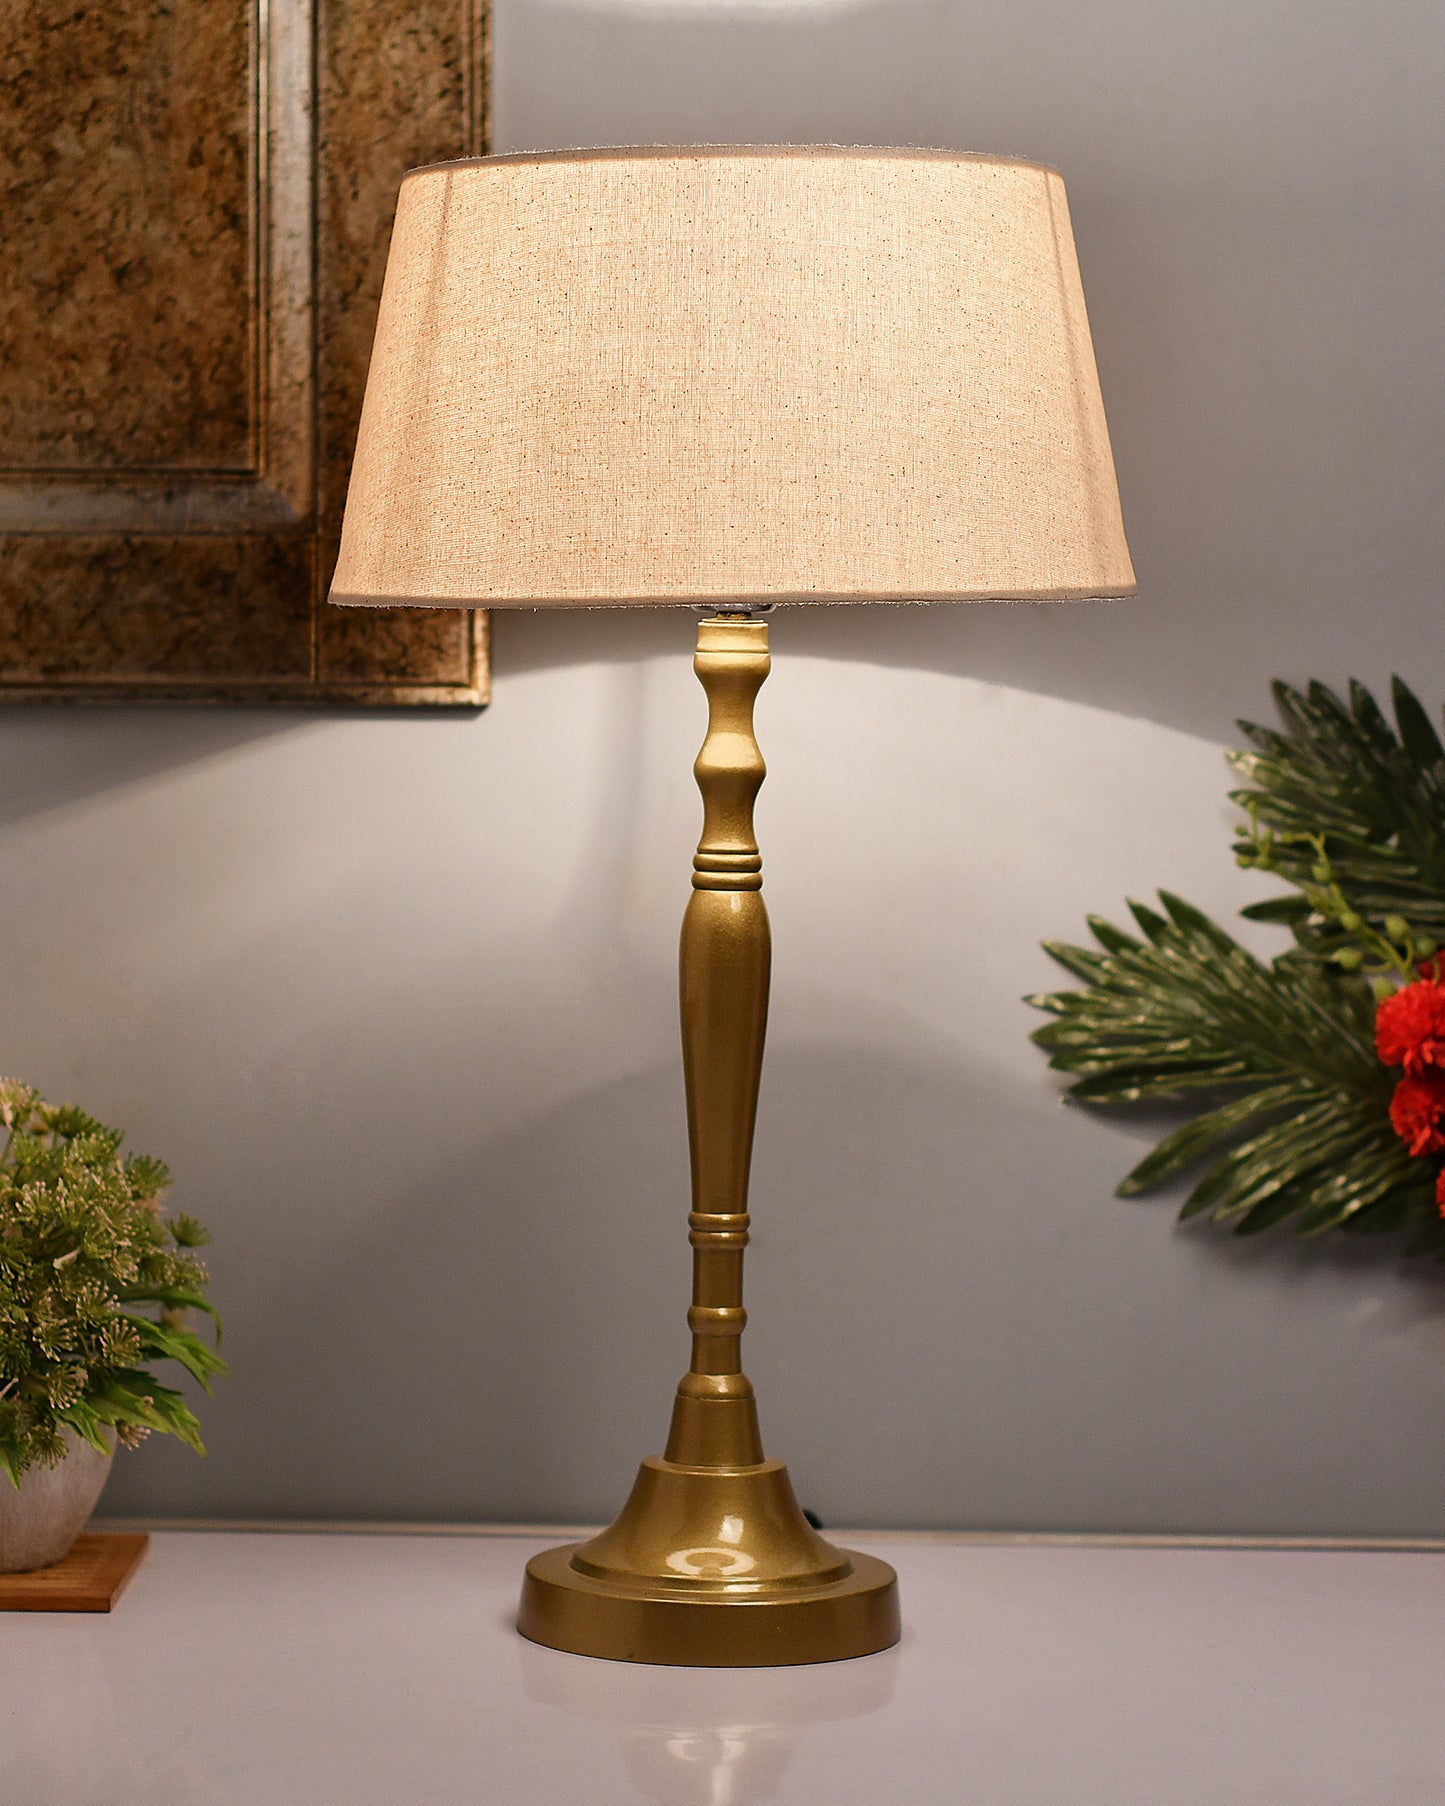 Imperial gold brushed lamp with shade